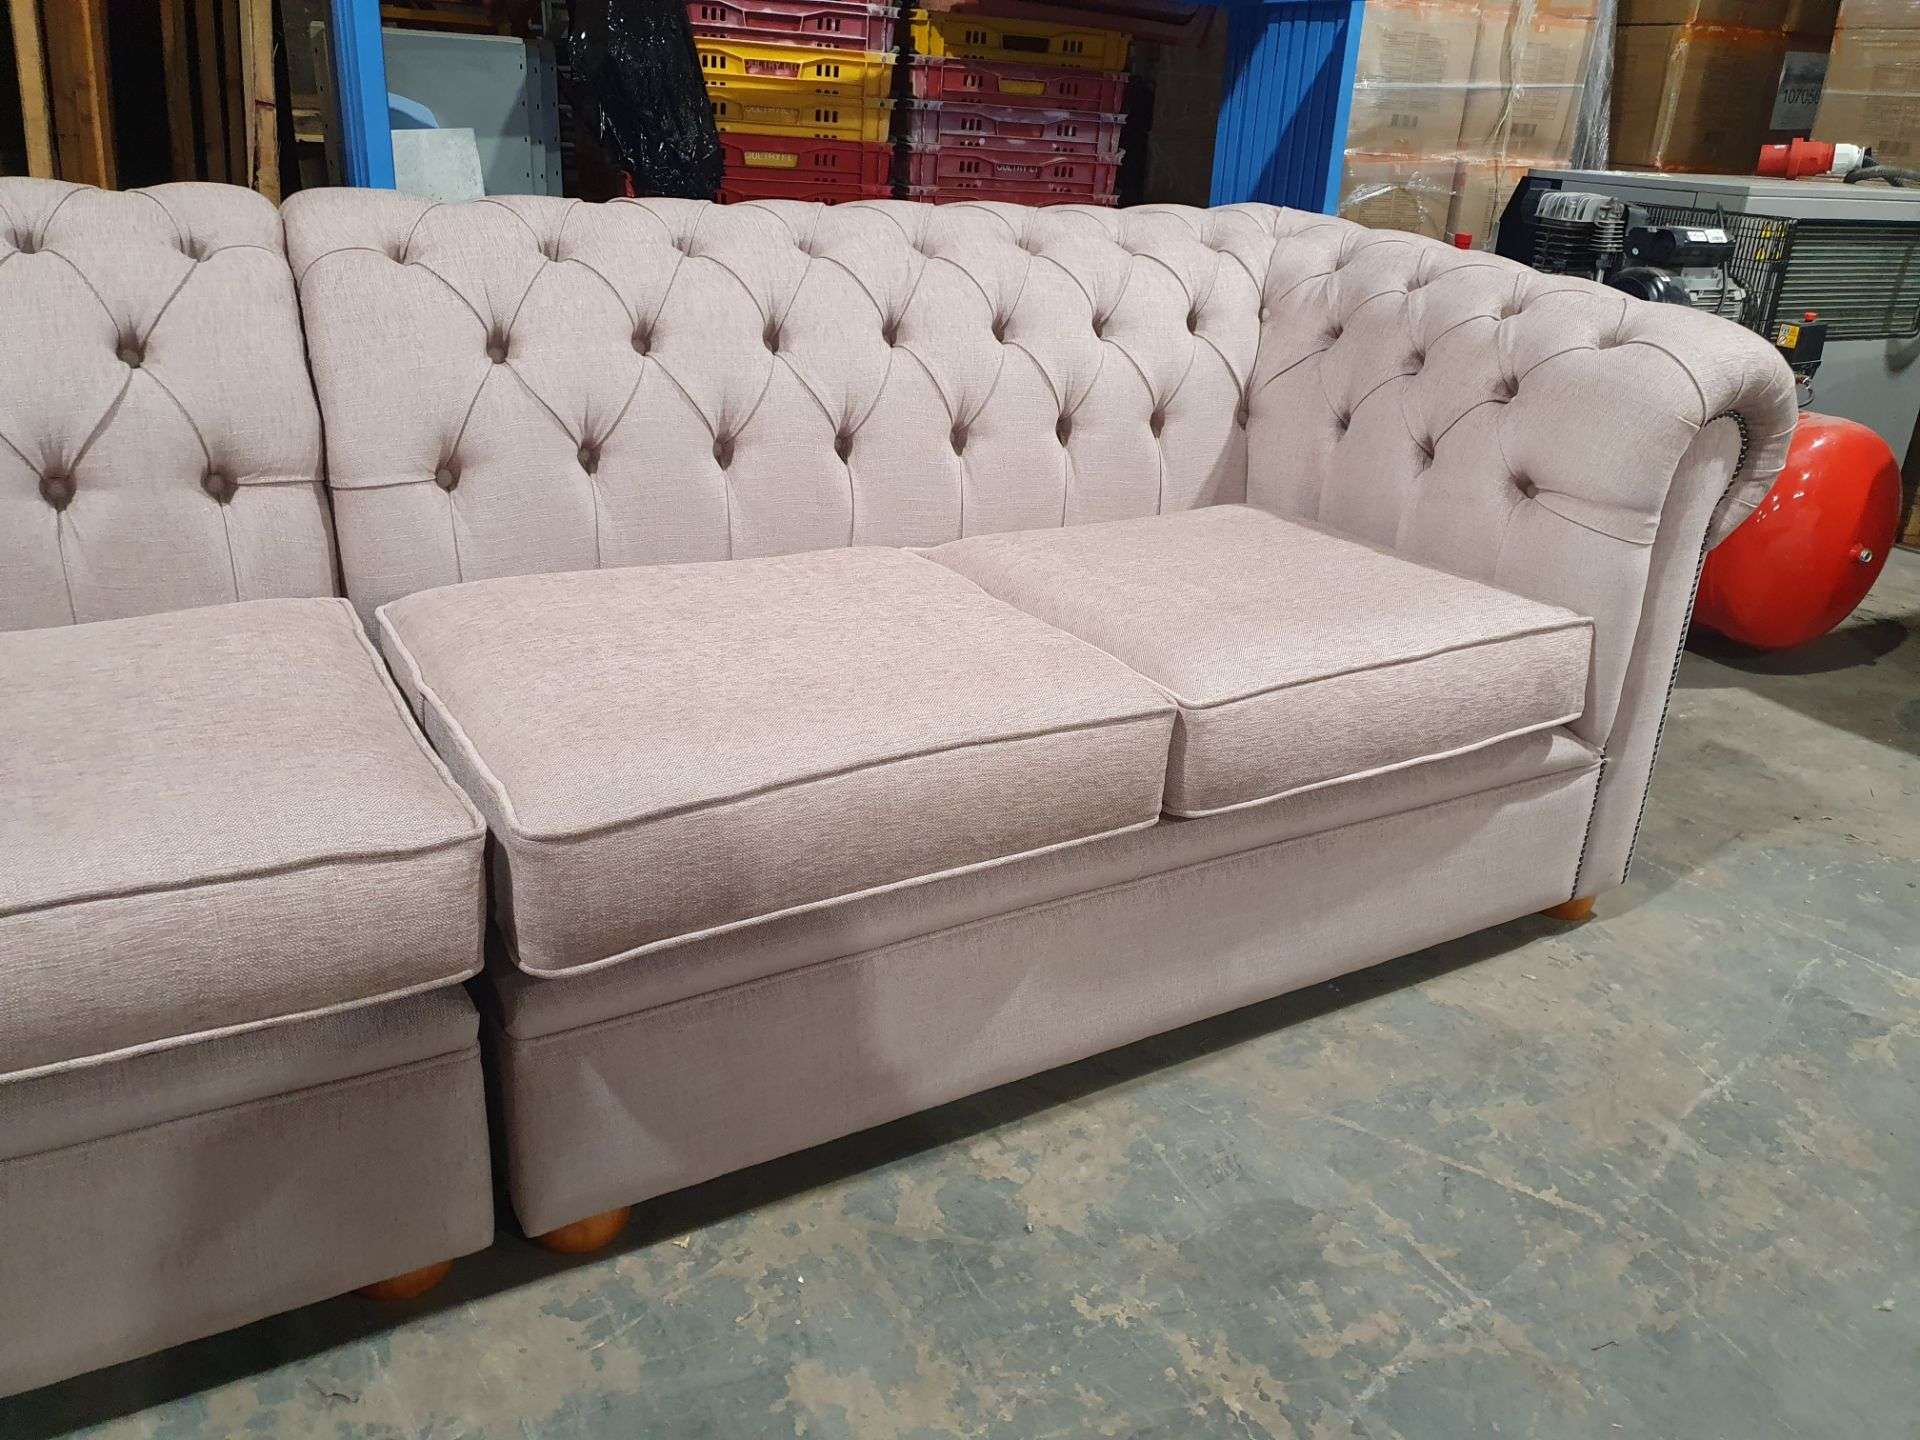 BESPOKE CHESTERFIELD 2 UNIT SOFA - Image 4 of 8